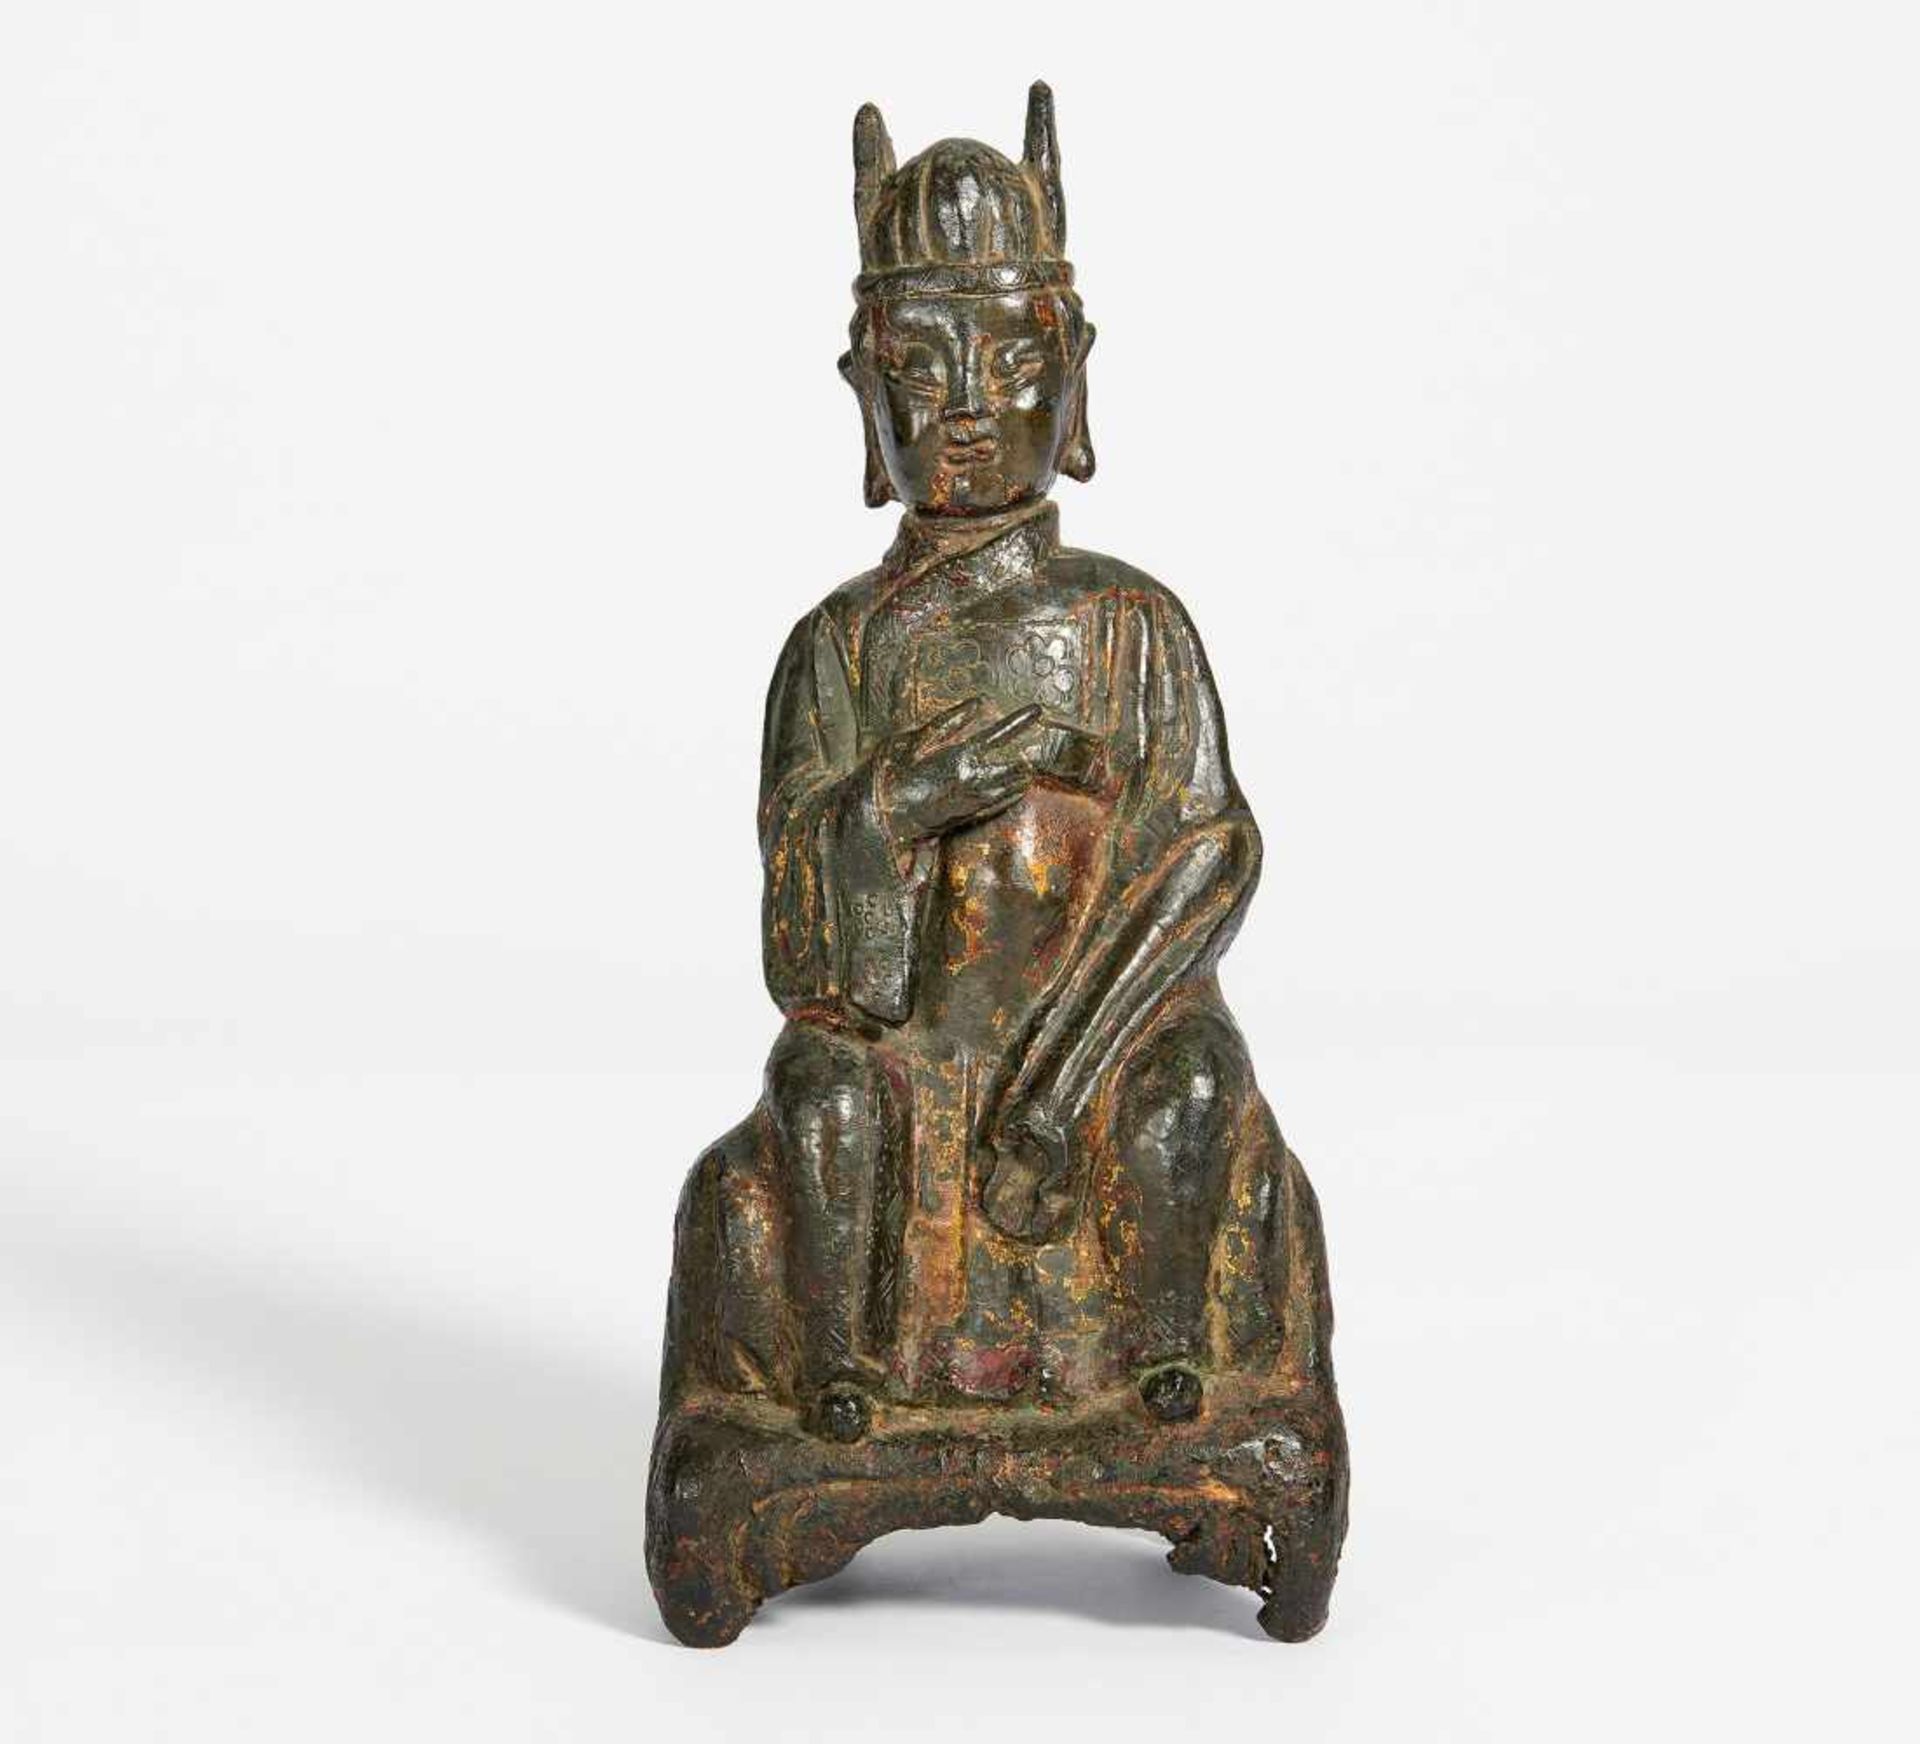 DAOIST SCHOLAR SITTING ON A THRONE. China. Ming dynasty. Bronze with dark patina and residue of